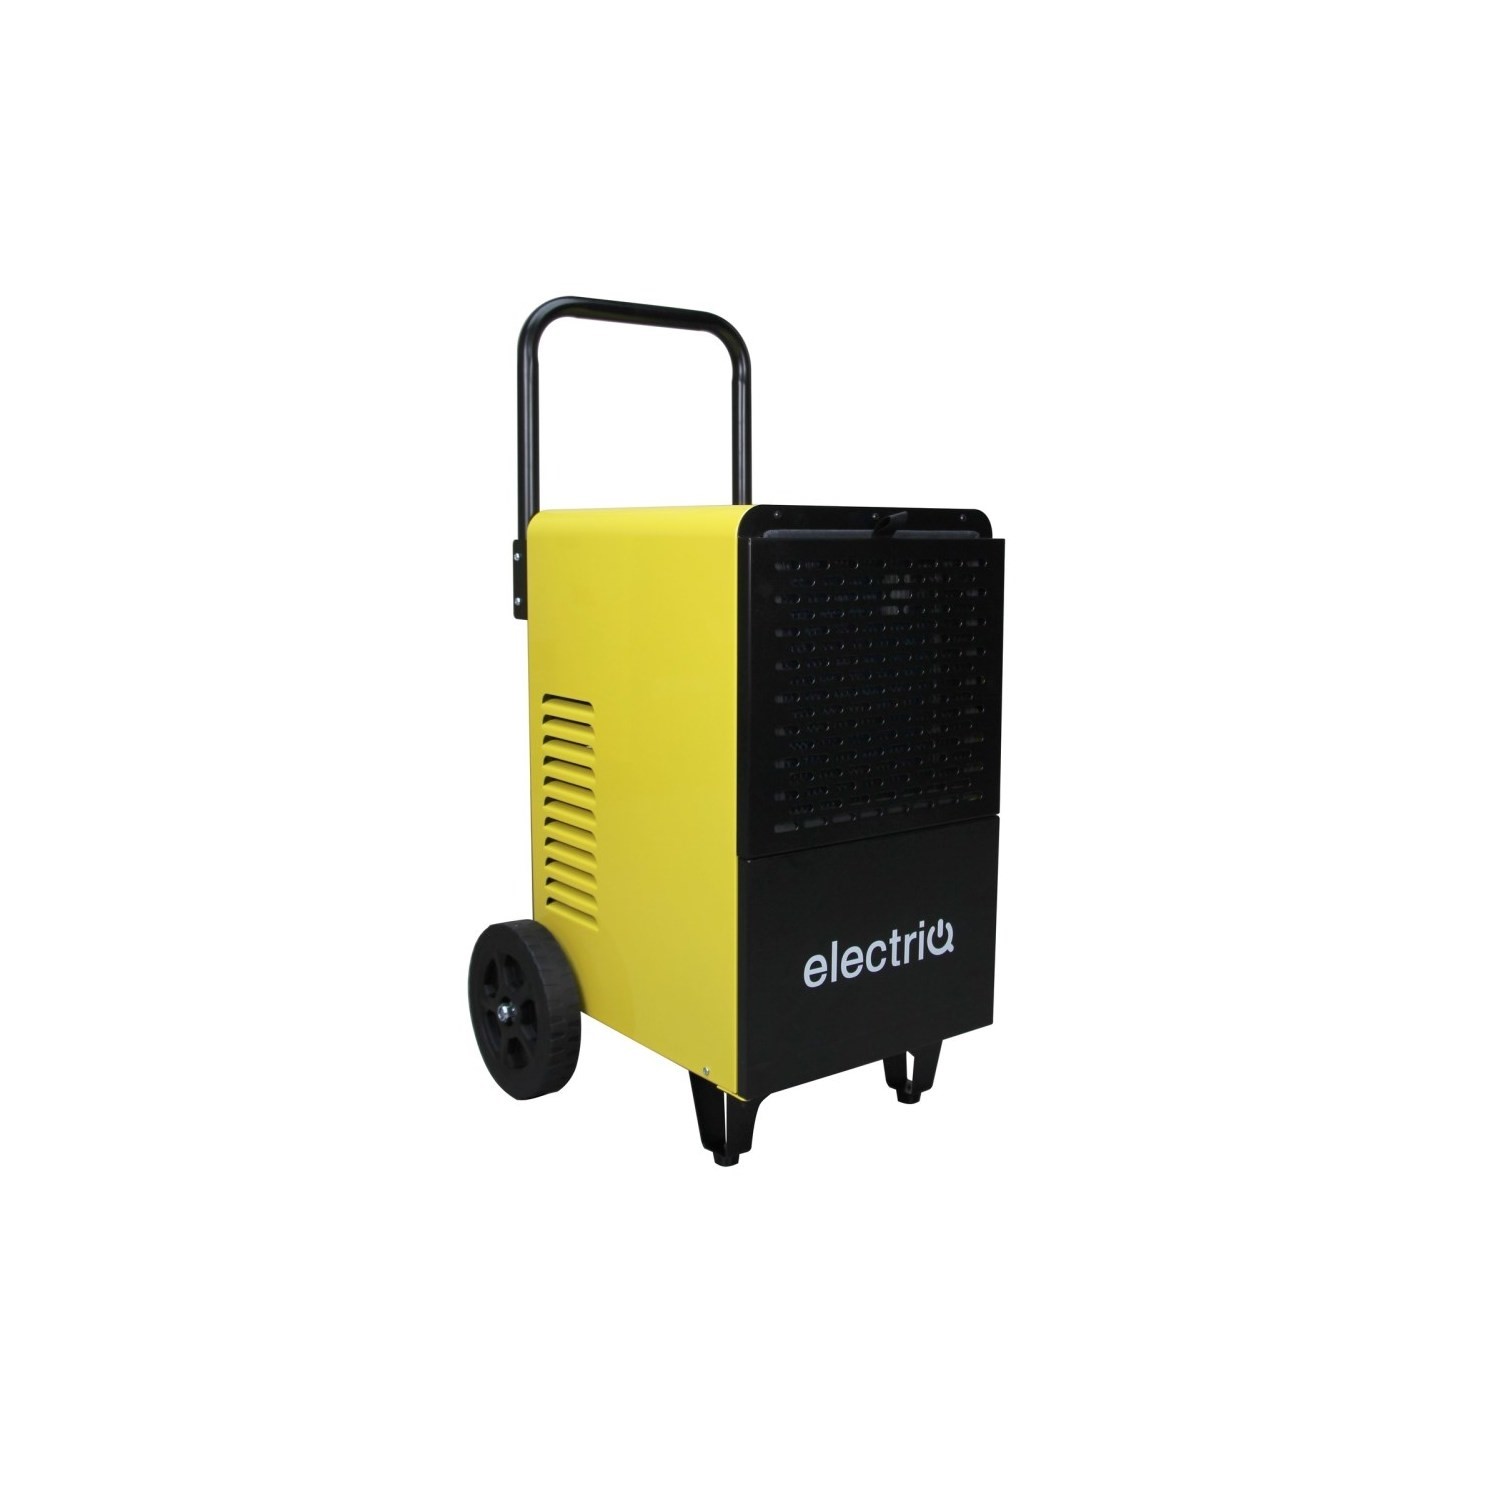 electriQ 30 litre per day Commercial Dehumidifier on Large wheels with digital humidistat